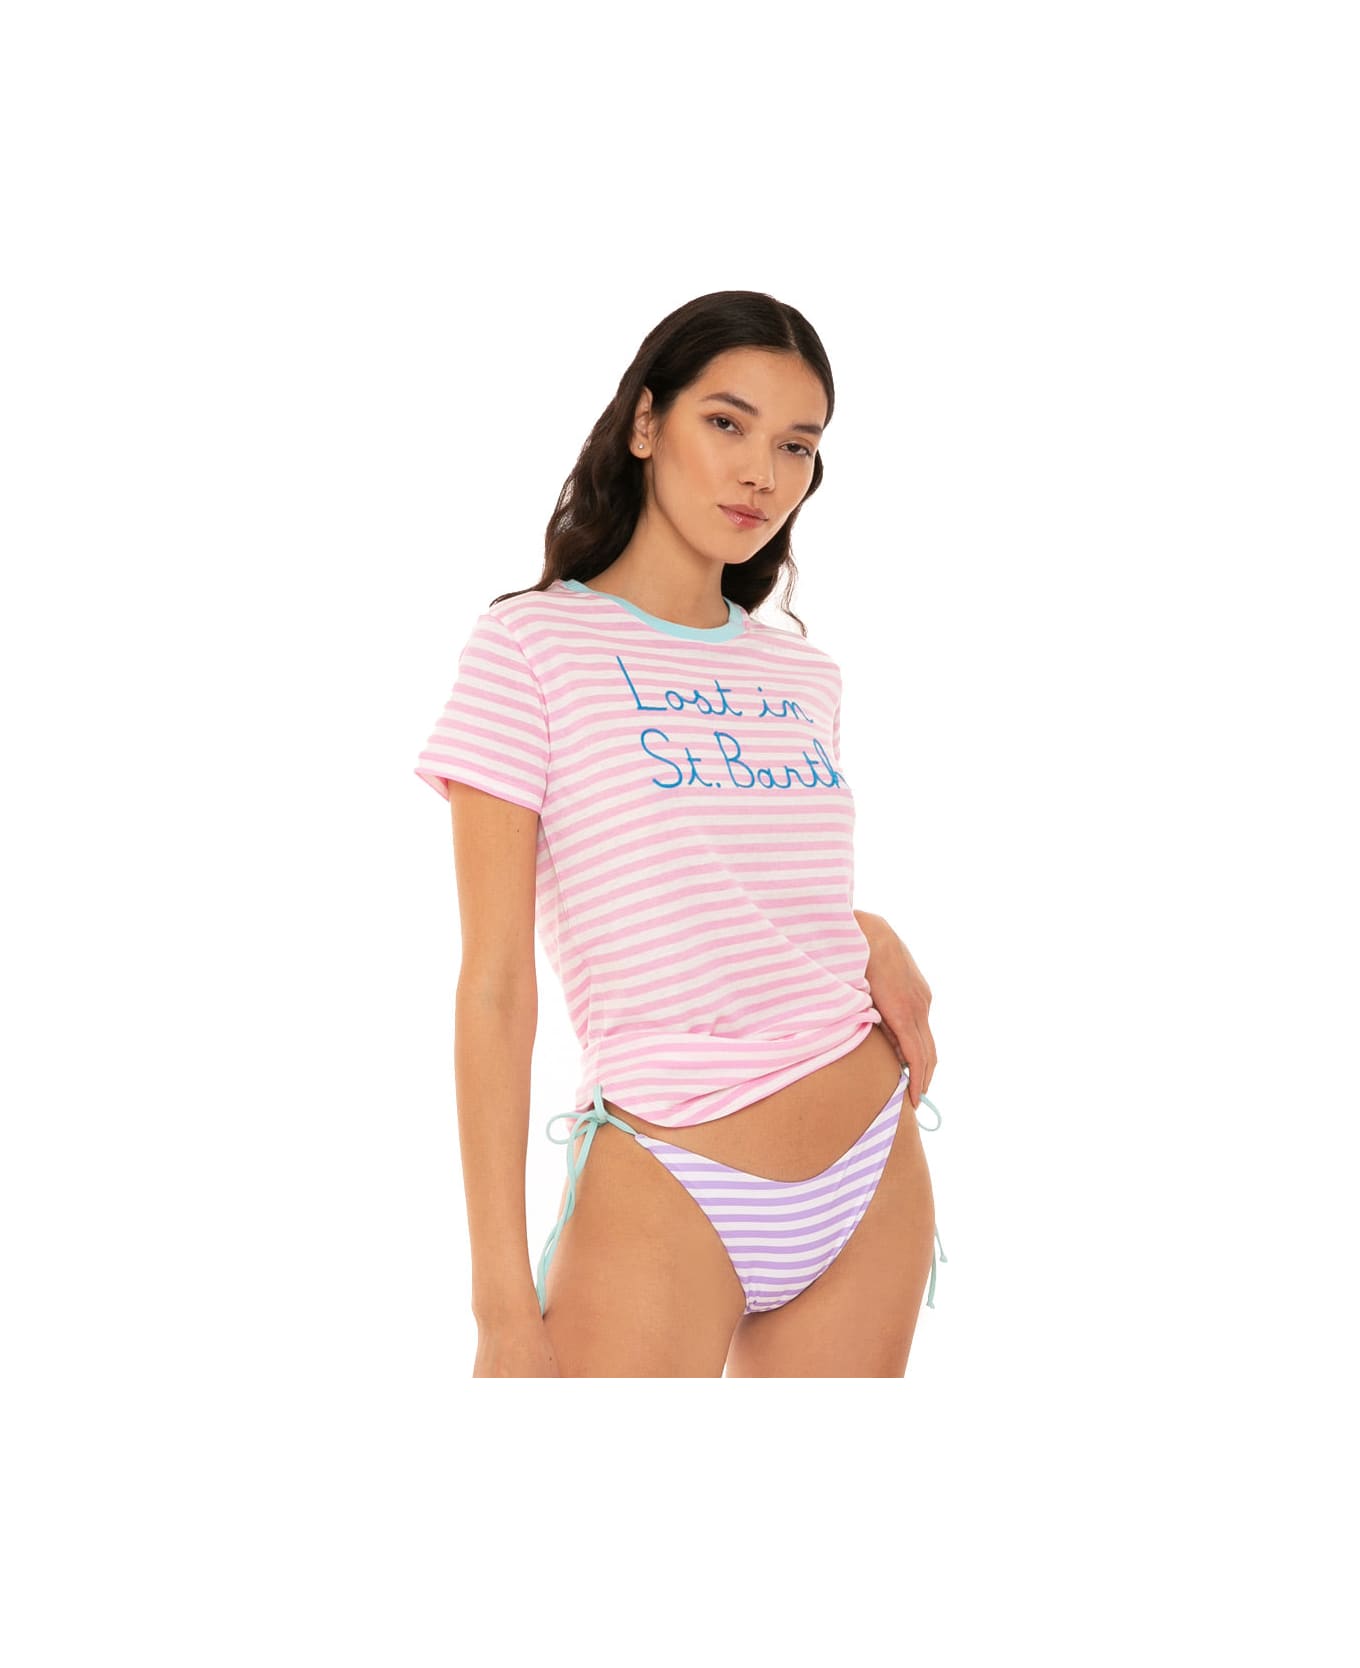 MC2 Saint Barth Striped T-shirt With Lost In St. Barth Embroidery - PINK